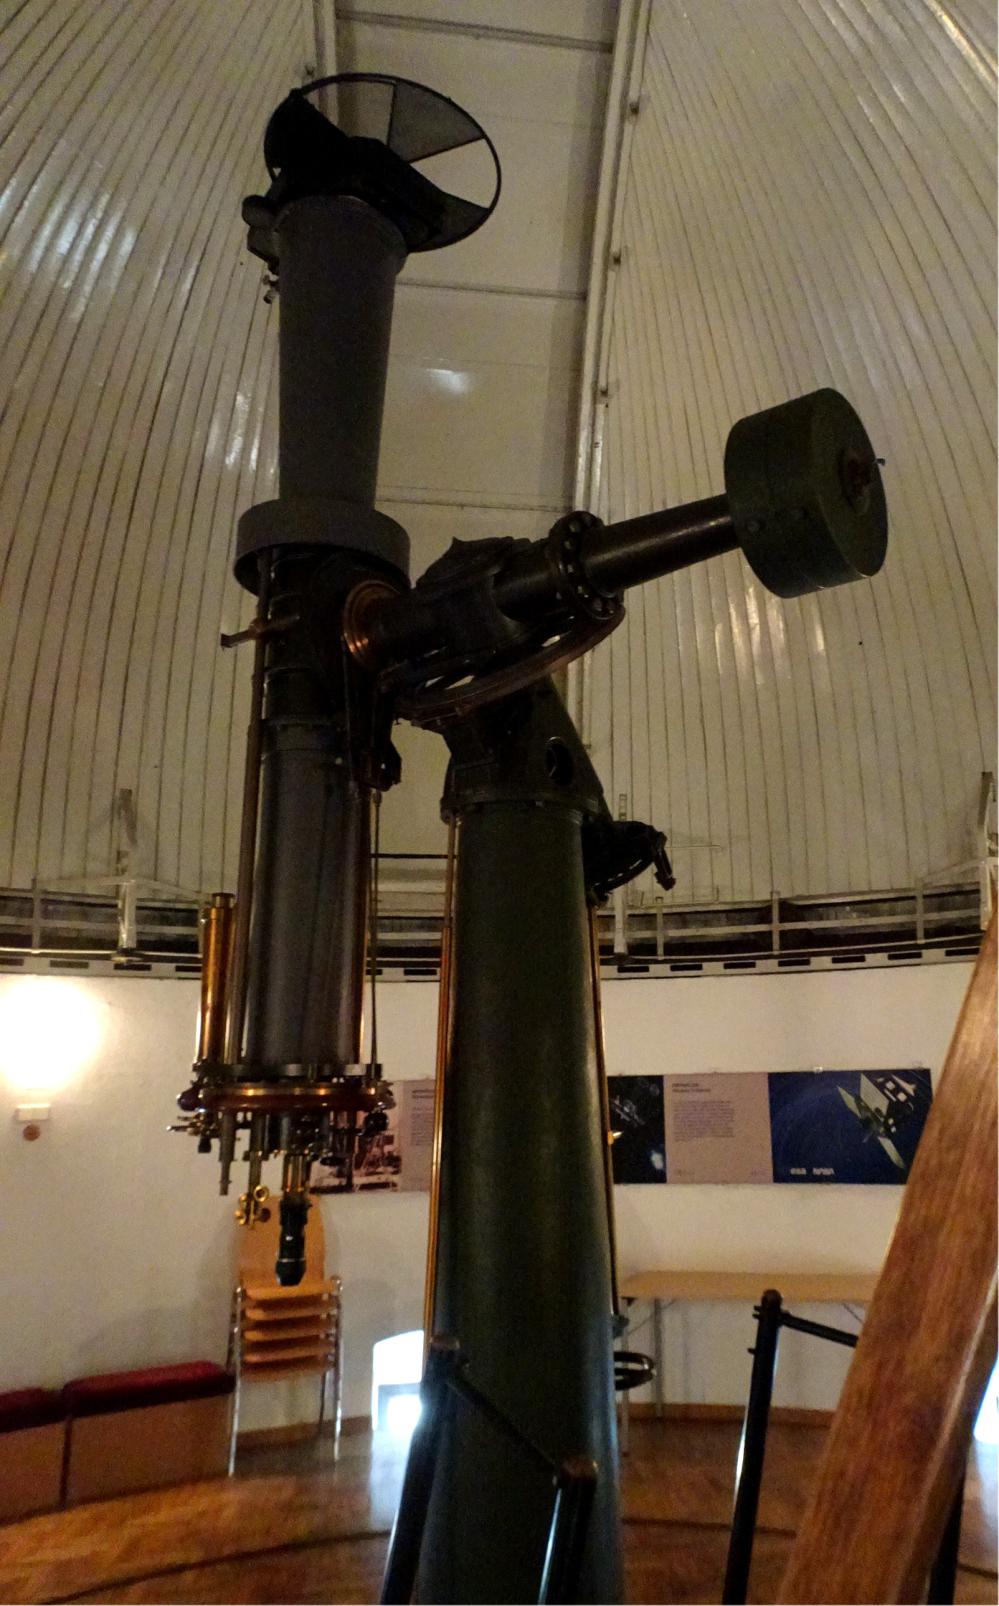 Heliometer, made by A. Repsold & Söhne of